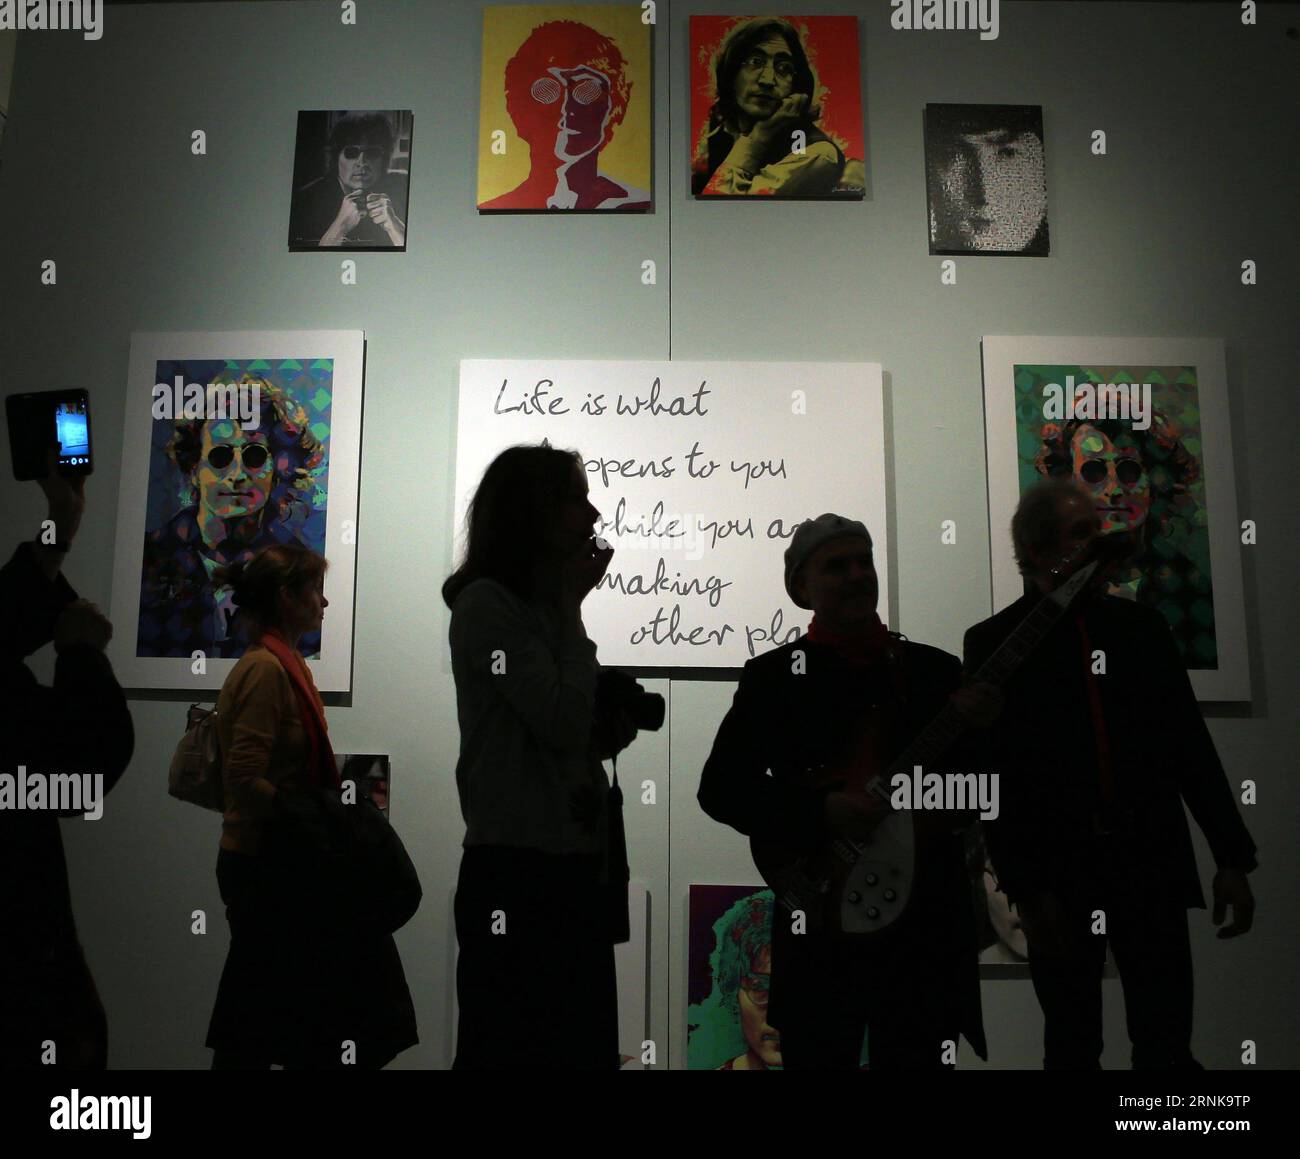 (170316) -- HEIDELBERG, March 15, 2017 -- People visit the exhibition Imagine John Lennon at the Kurpfaelzische Museum in Heidelberg, Germany, on March 15, 2017. Opened on Wednesday the exhibition will last to June 25, 2017. )(gj) GERMANY-HEIDELBERG-JOHN LENNON LuoxHuanhuan PUBLICATIONxNOTxINxCHN   170316 Heidelberg March 15 2017 Celebrities Visit The Exhibition Imagine John Lennon AT The Kurpfälzische Museum in Heidelberg Germany ON March 15 2017 opened ON Wednesday The Exhibition will Load to June 25 2017 GJ Germany Heidelberg John Lennon LuoxHuanhuan PUBLICATIONxNOTxINxCHN Stock Photo